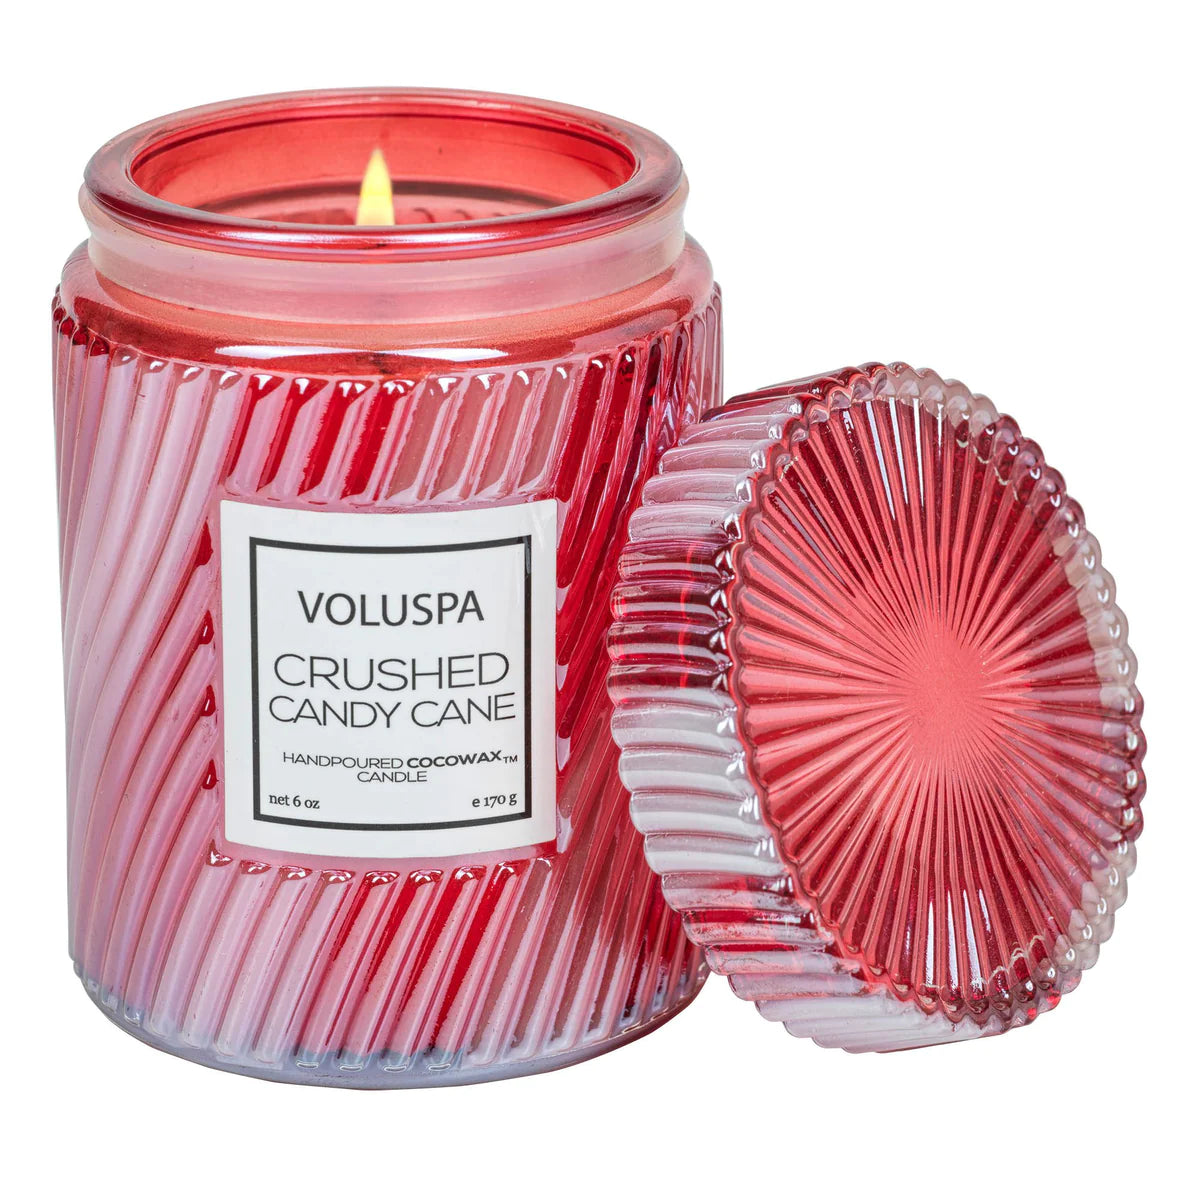 Crushed Candy Cane Candles